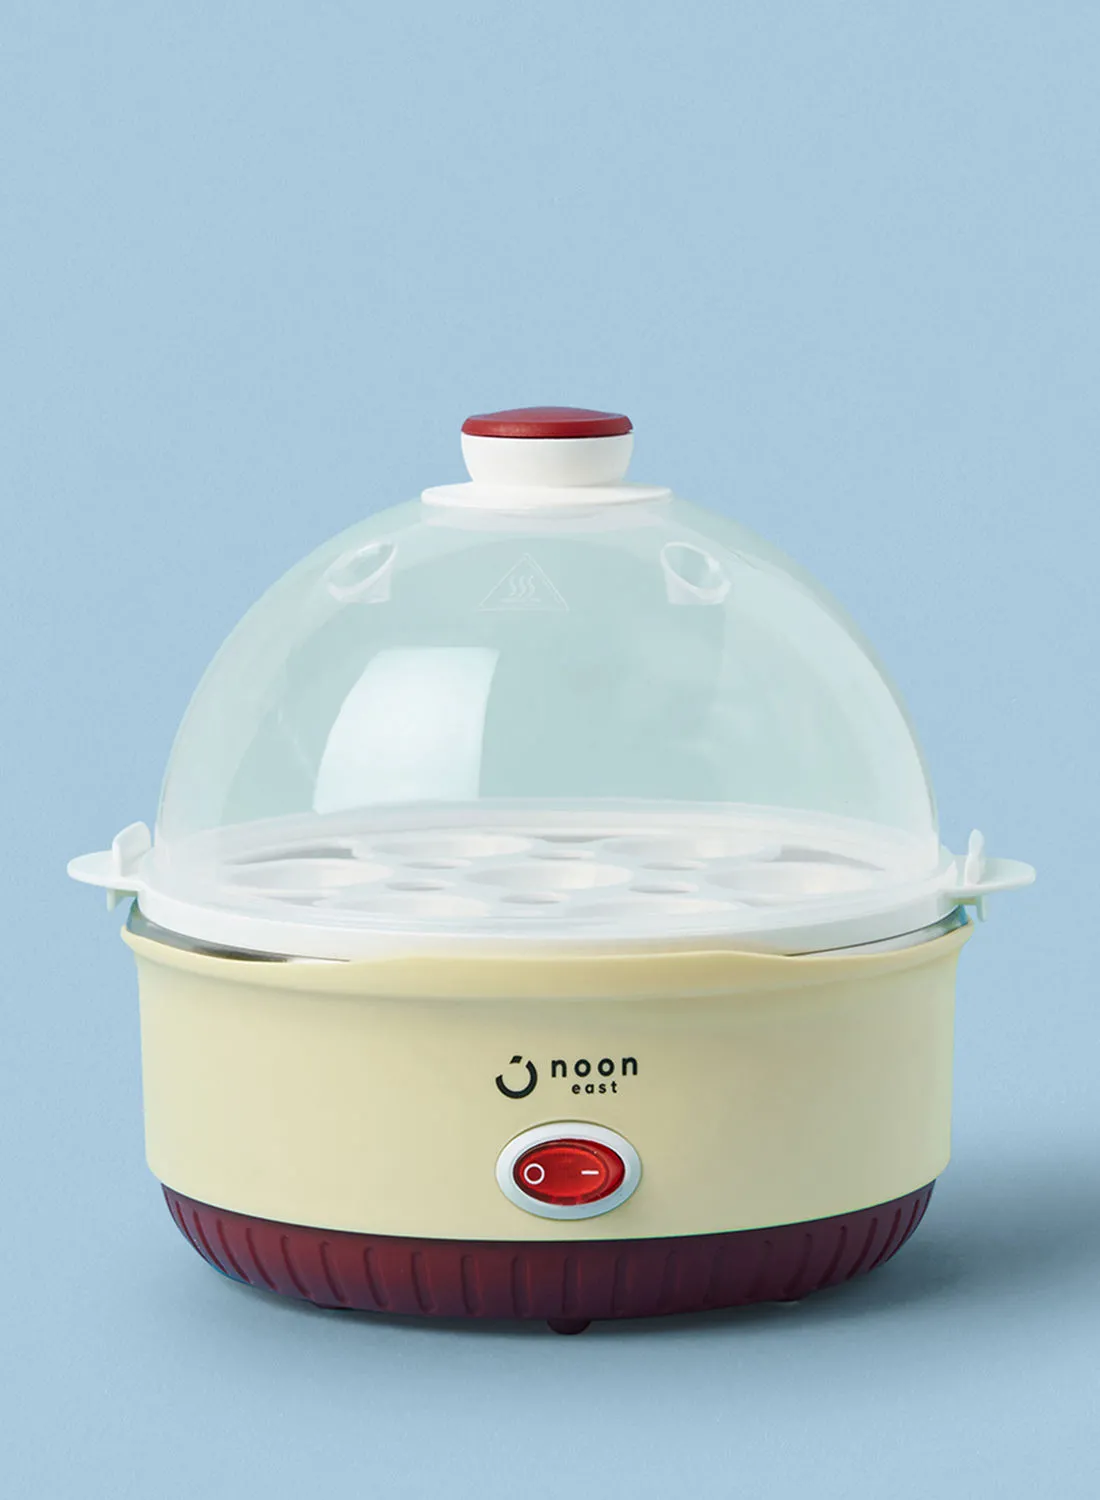 noon east Egg Cooker Boiler 7 Eggs 350 W Frying Pan- Yellow/Red/Clear